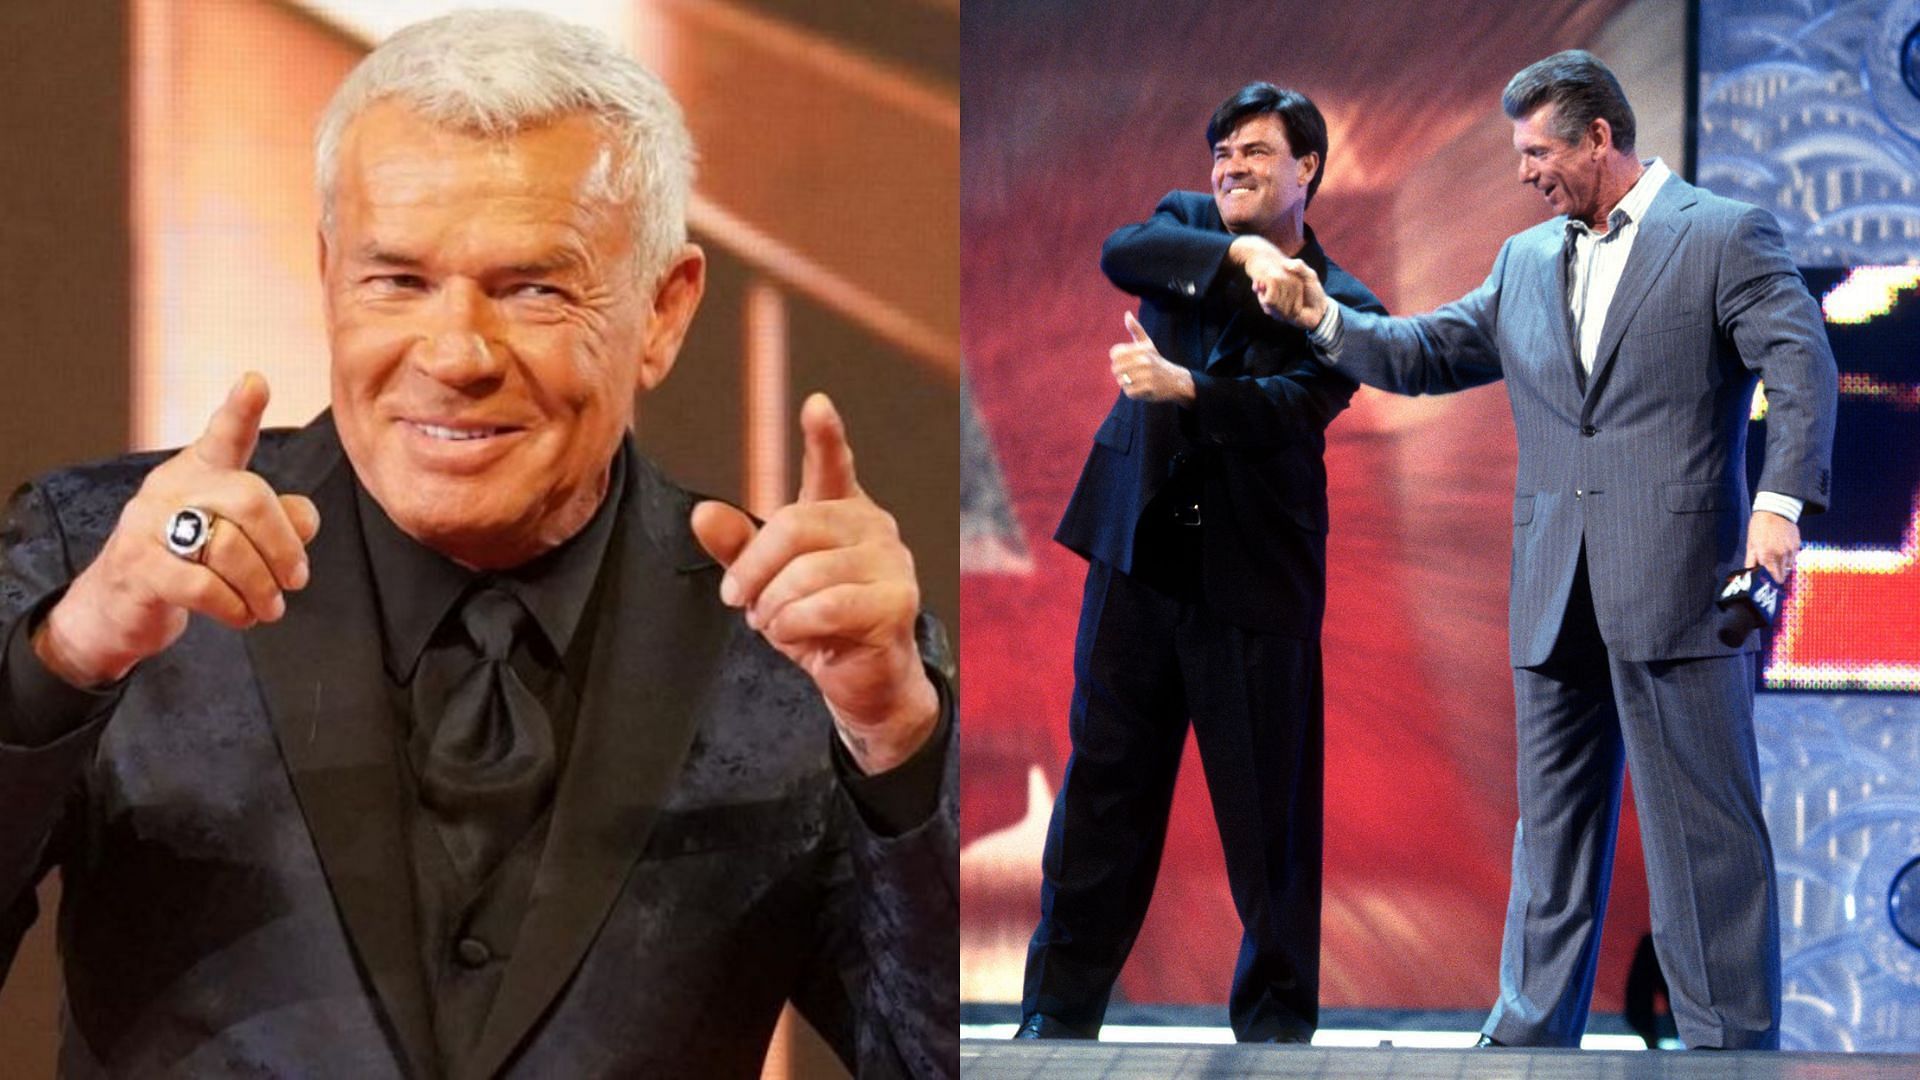 Could Eric Bischoff be running WWE?